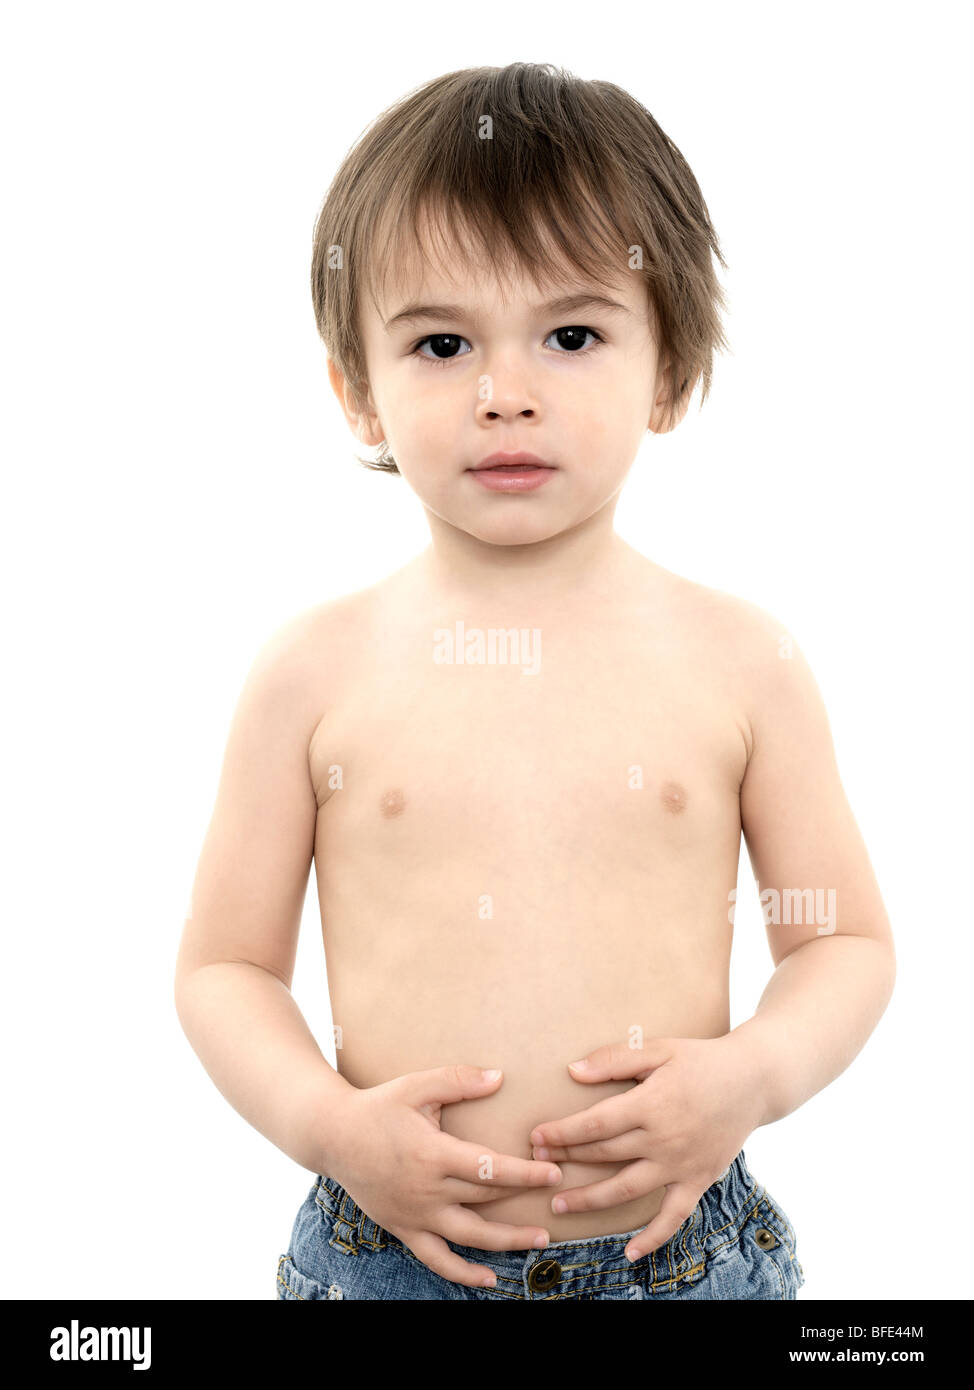 Two and half year old boy wearing jeans and no shirt against a white  background Stock Photo - Alamy